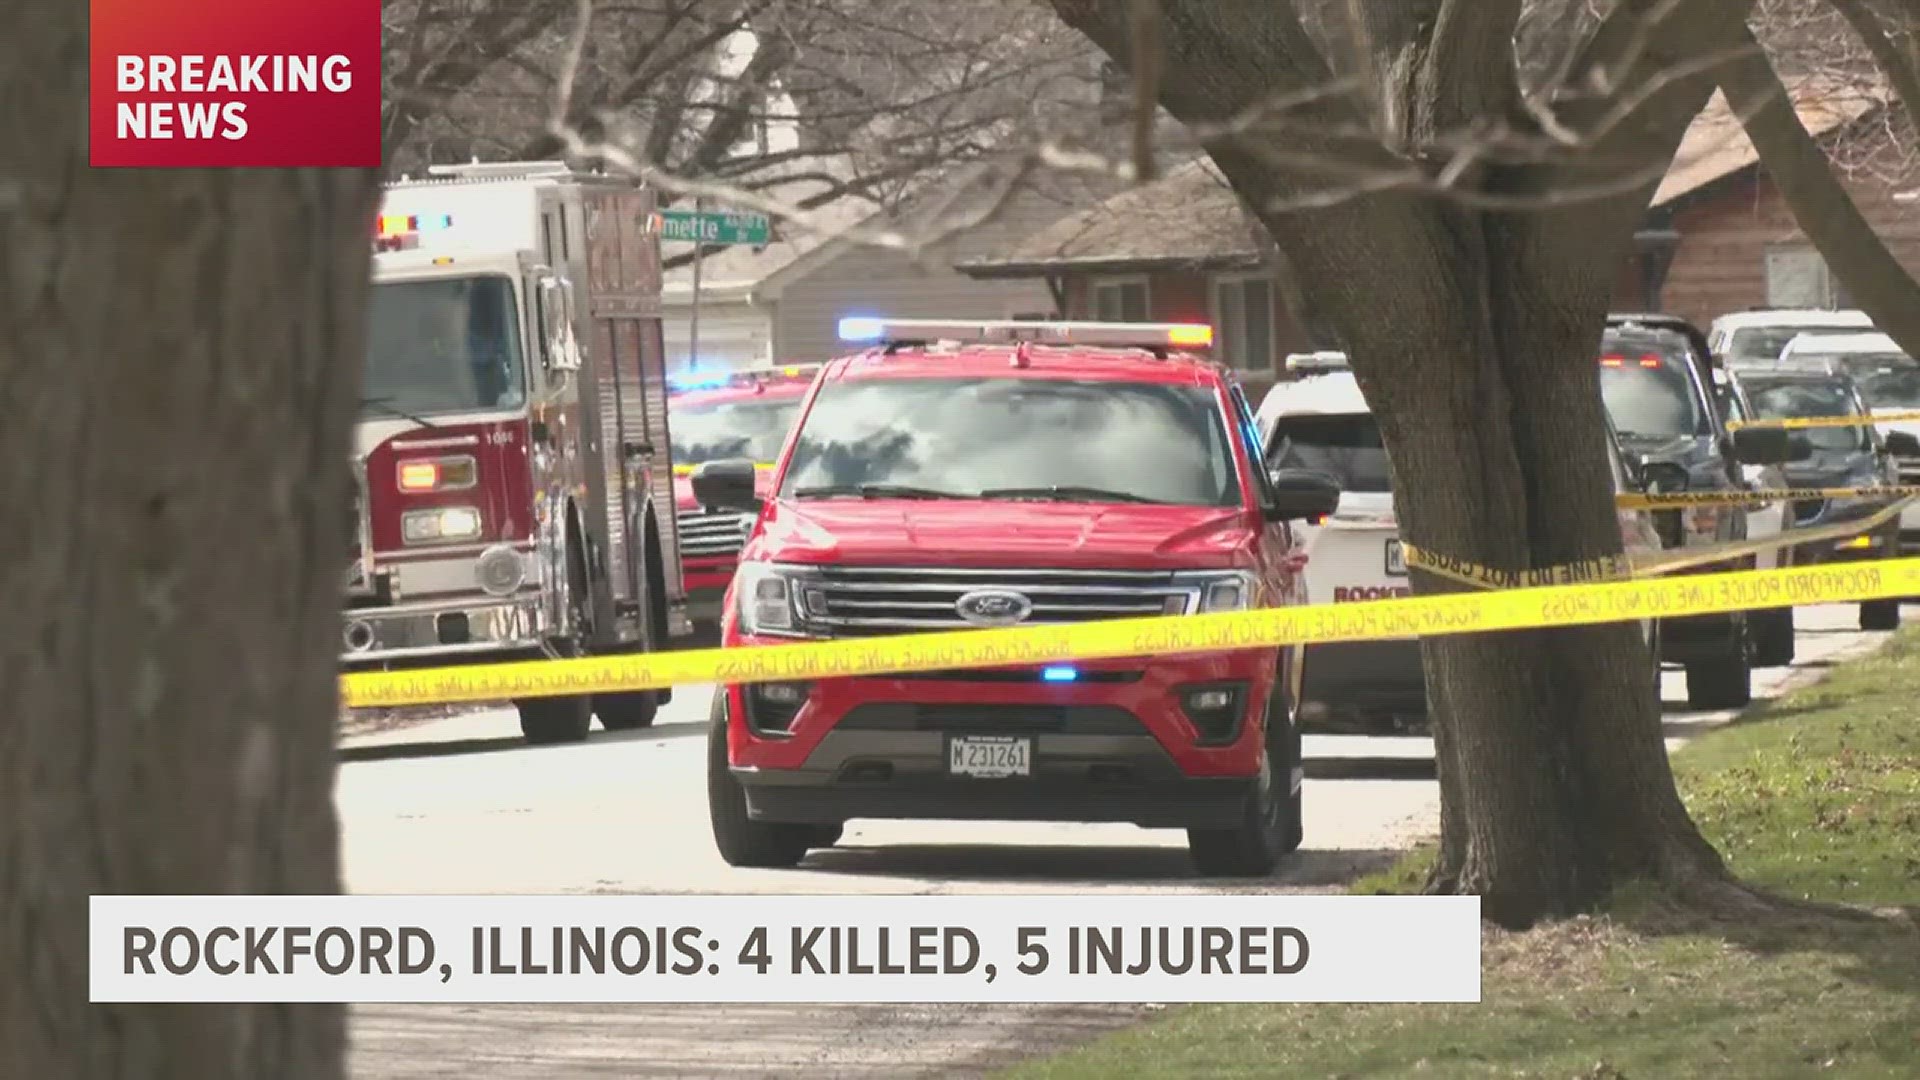 Four people were killed and five were wounded in stabbings in Rockford on Wednesday, authorities said.